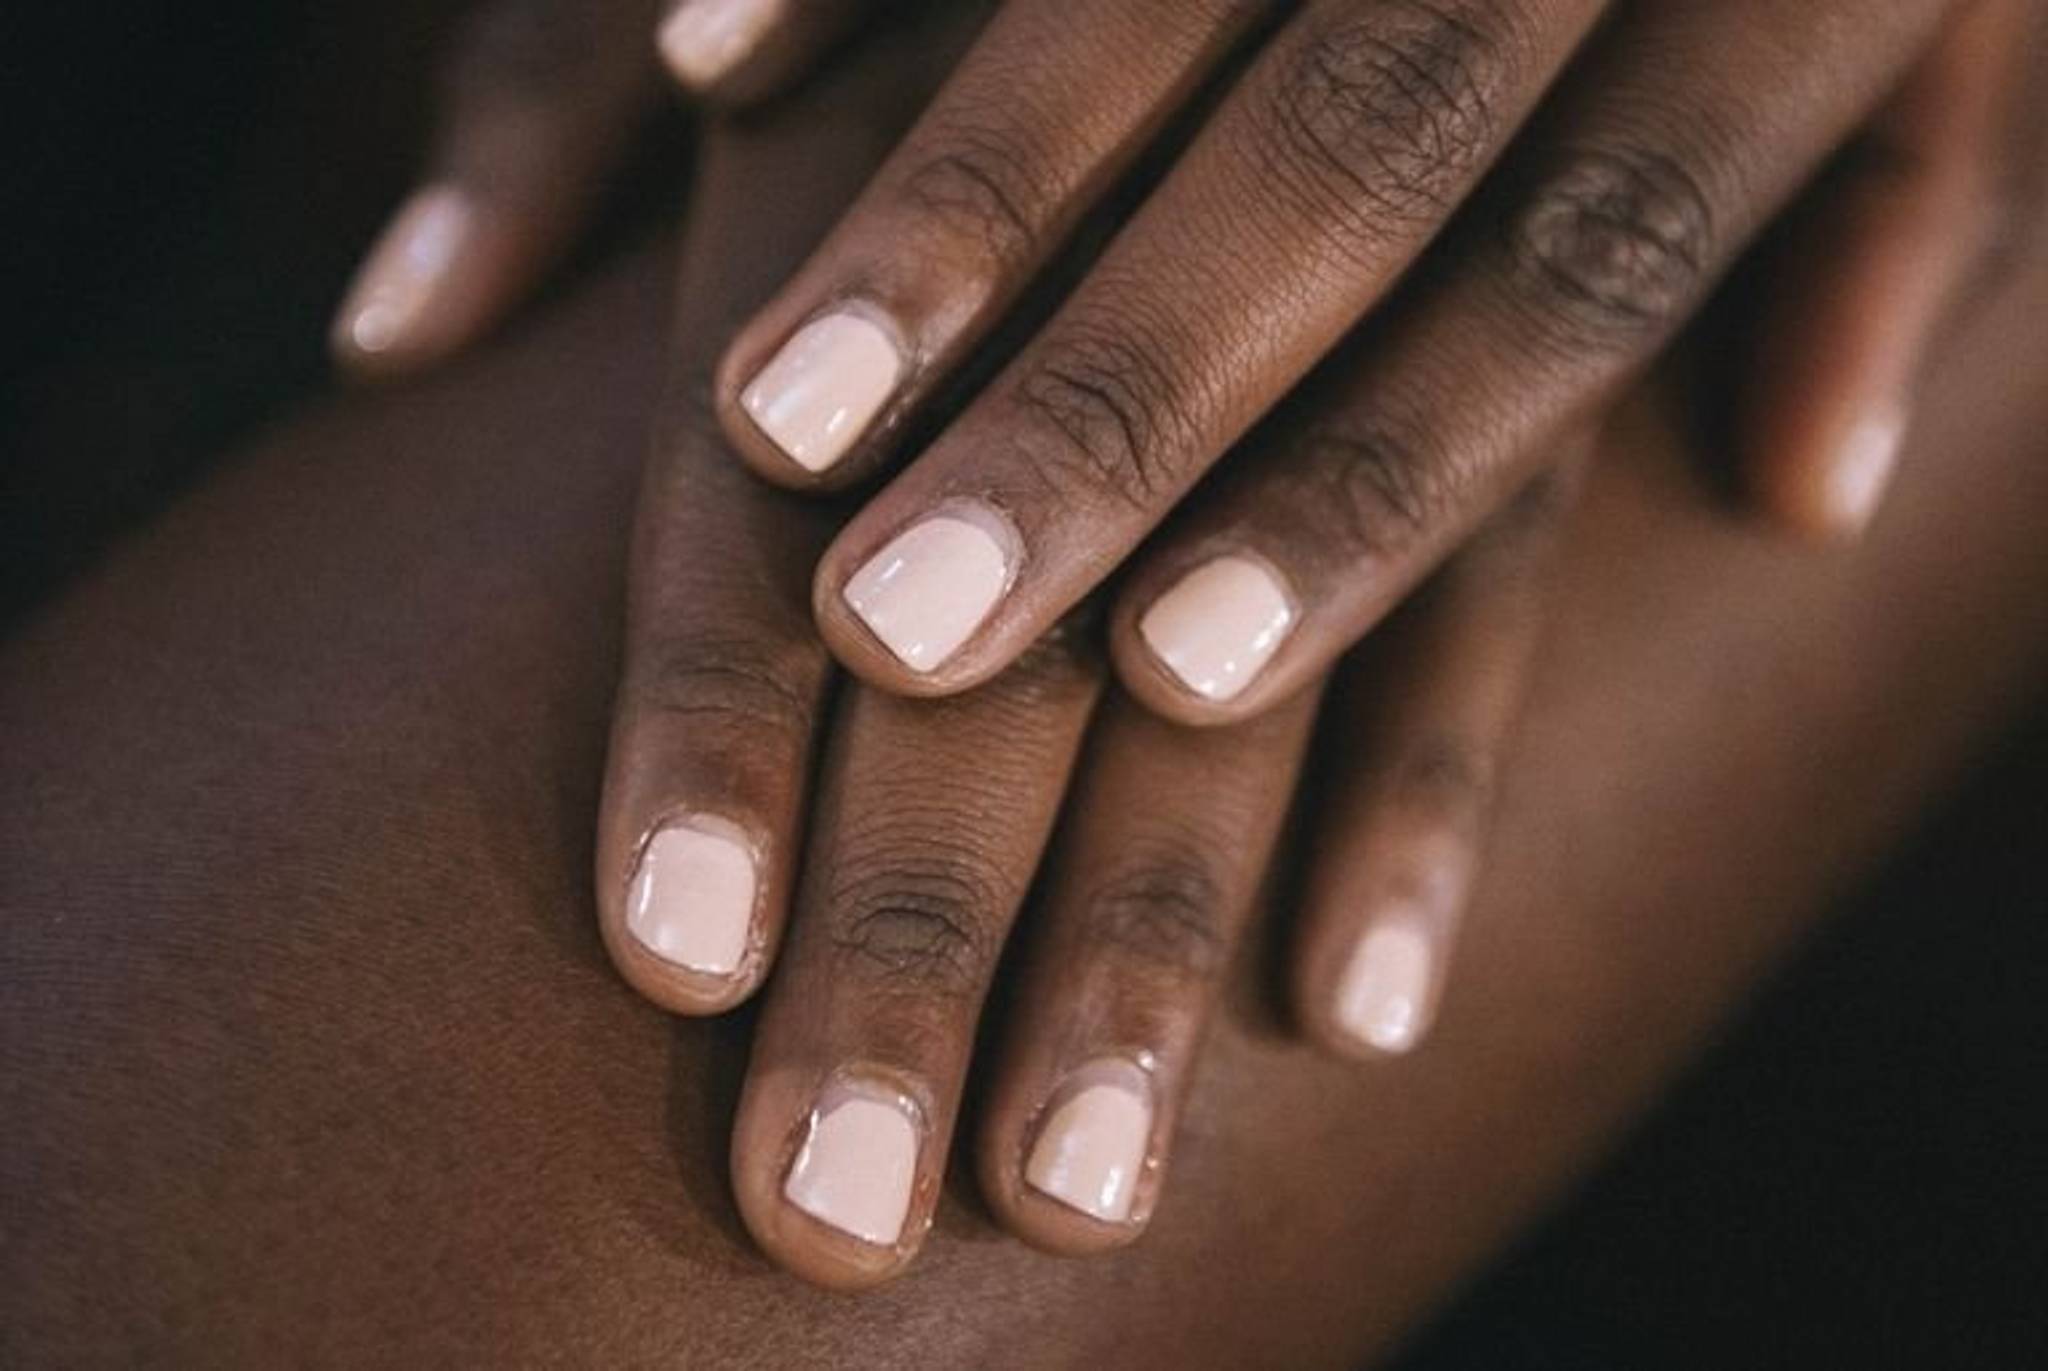 Marc Jacobs normalises imperfect manicures